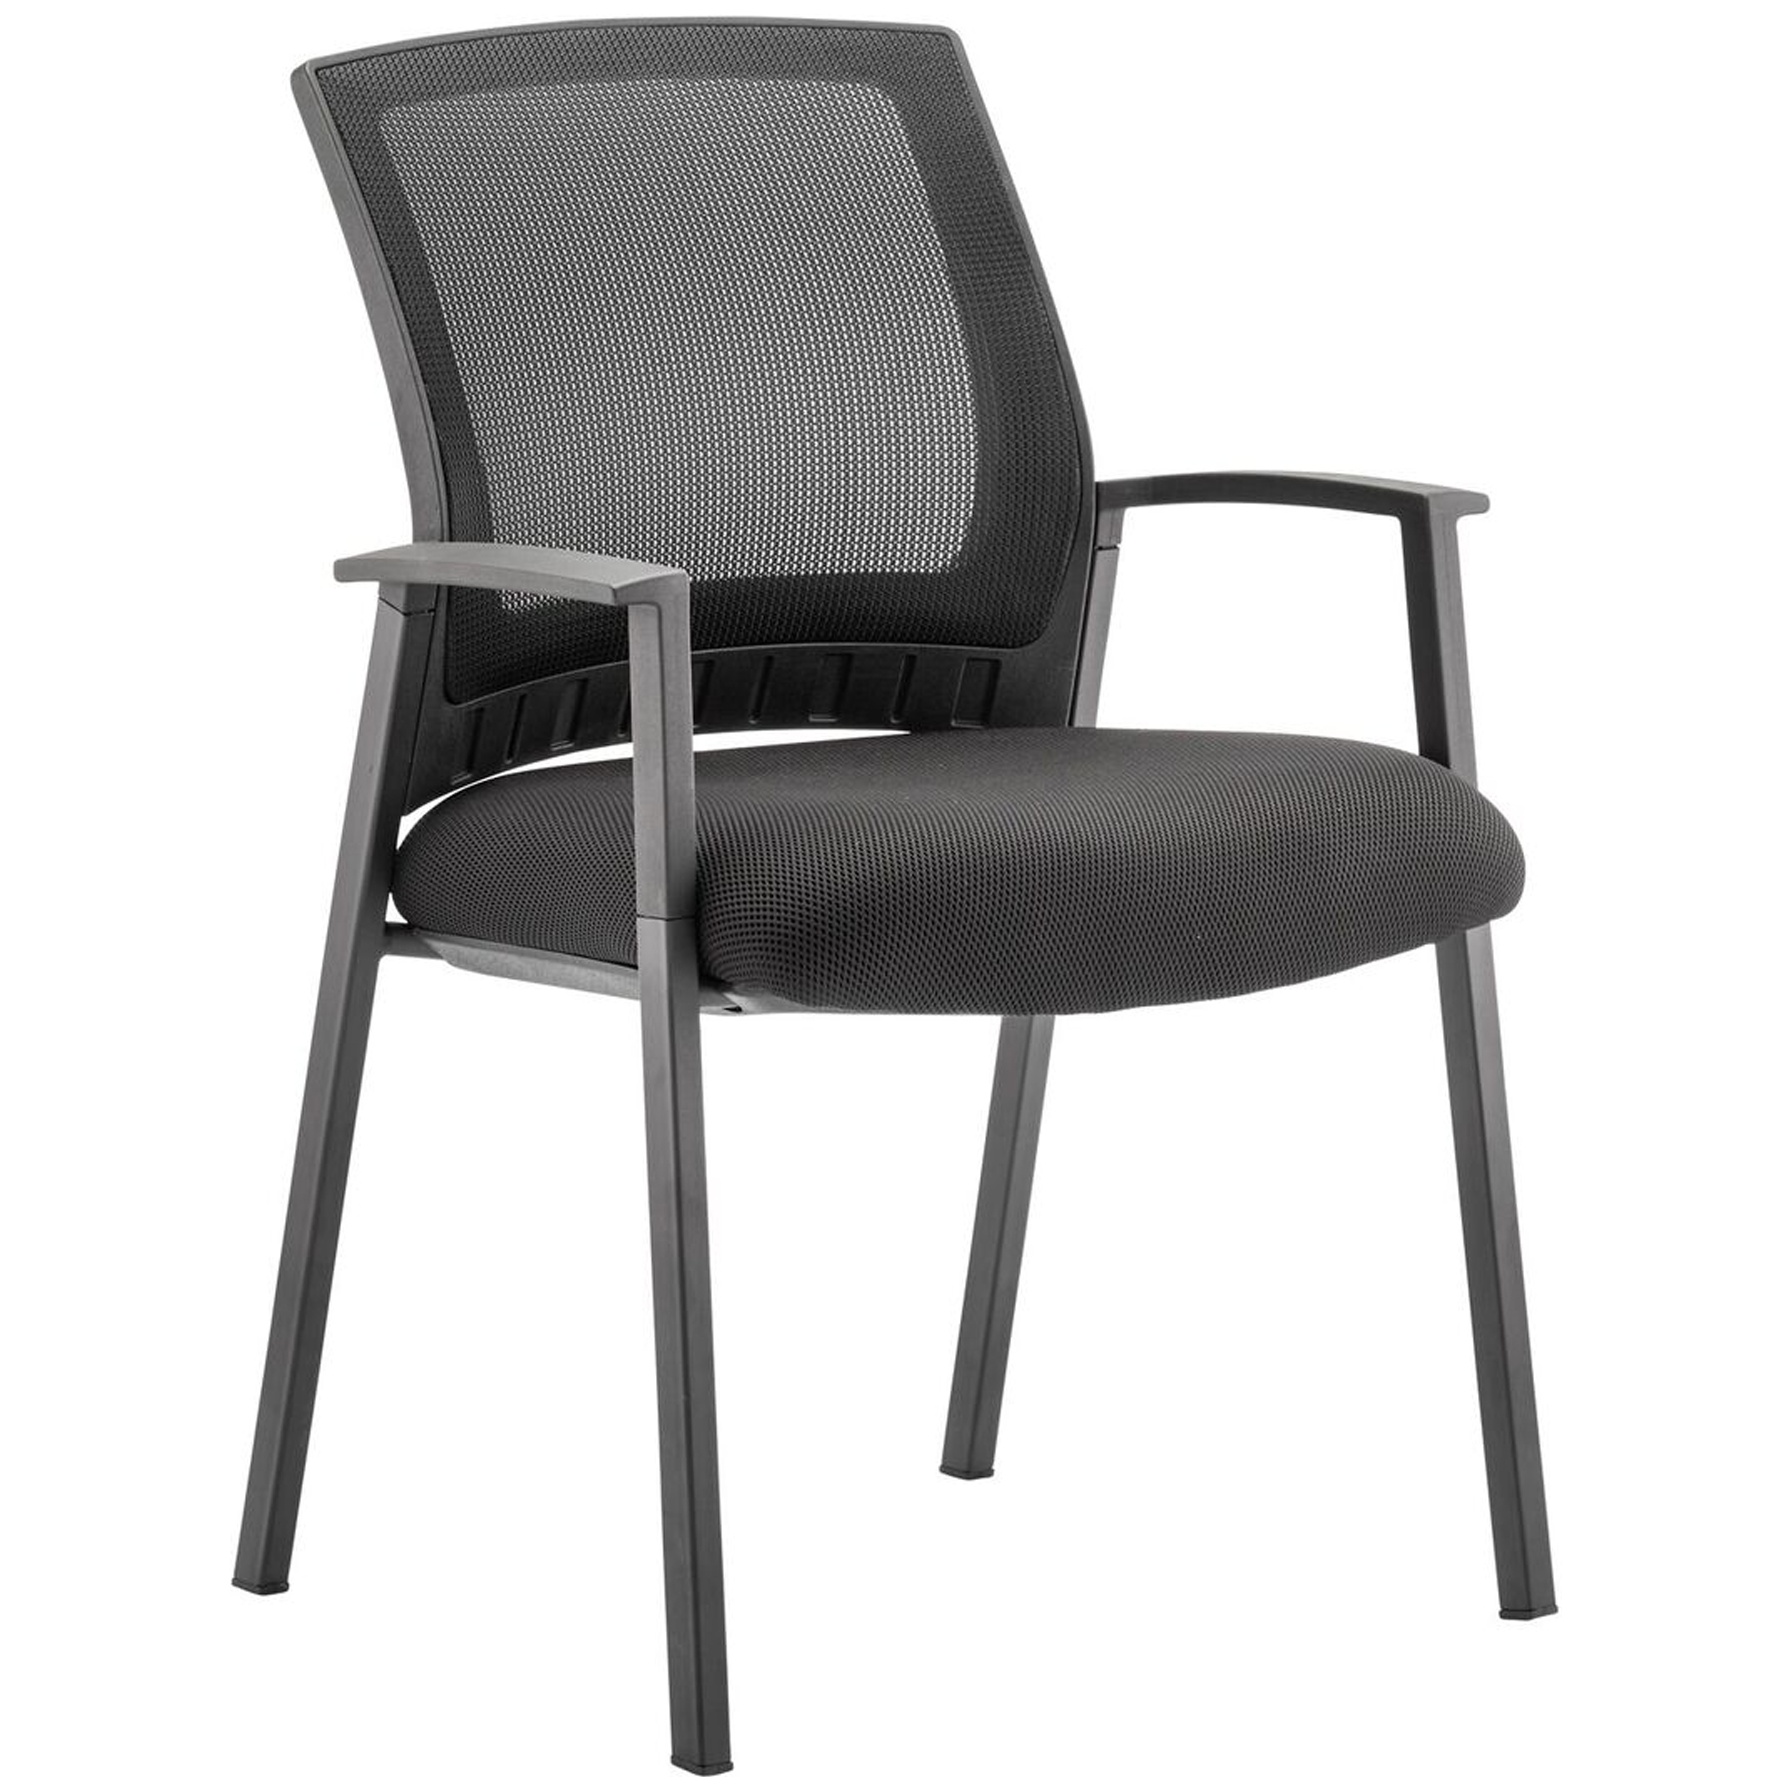 Skye Mesh Back Visitor Chair | Visitor Chairs